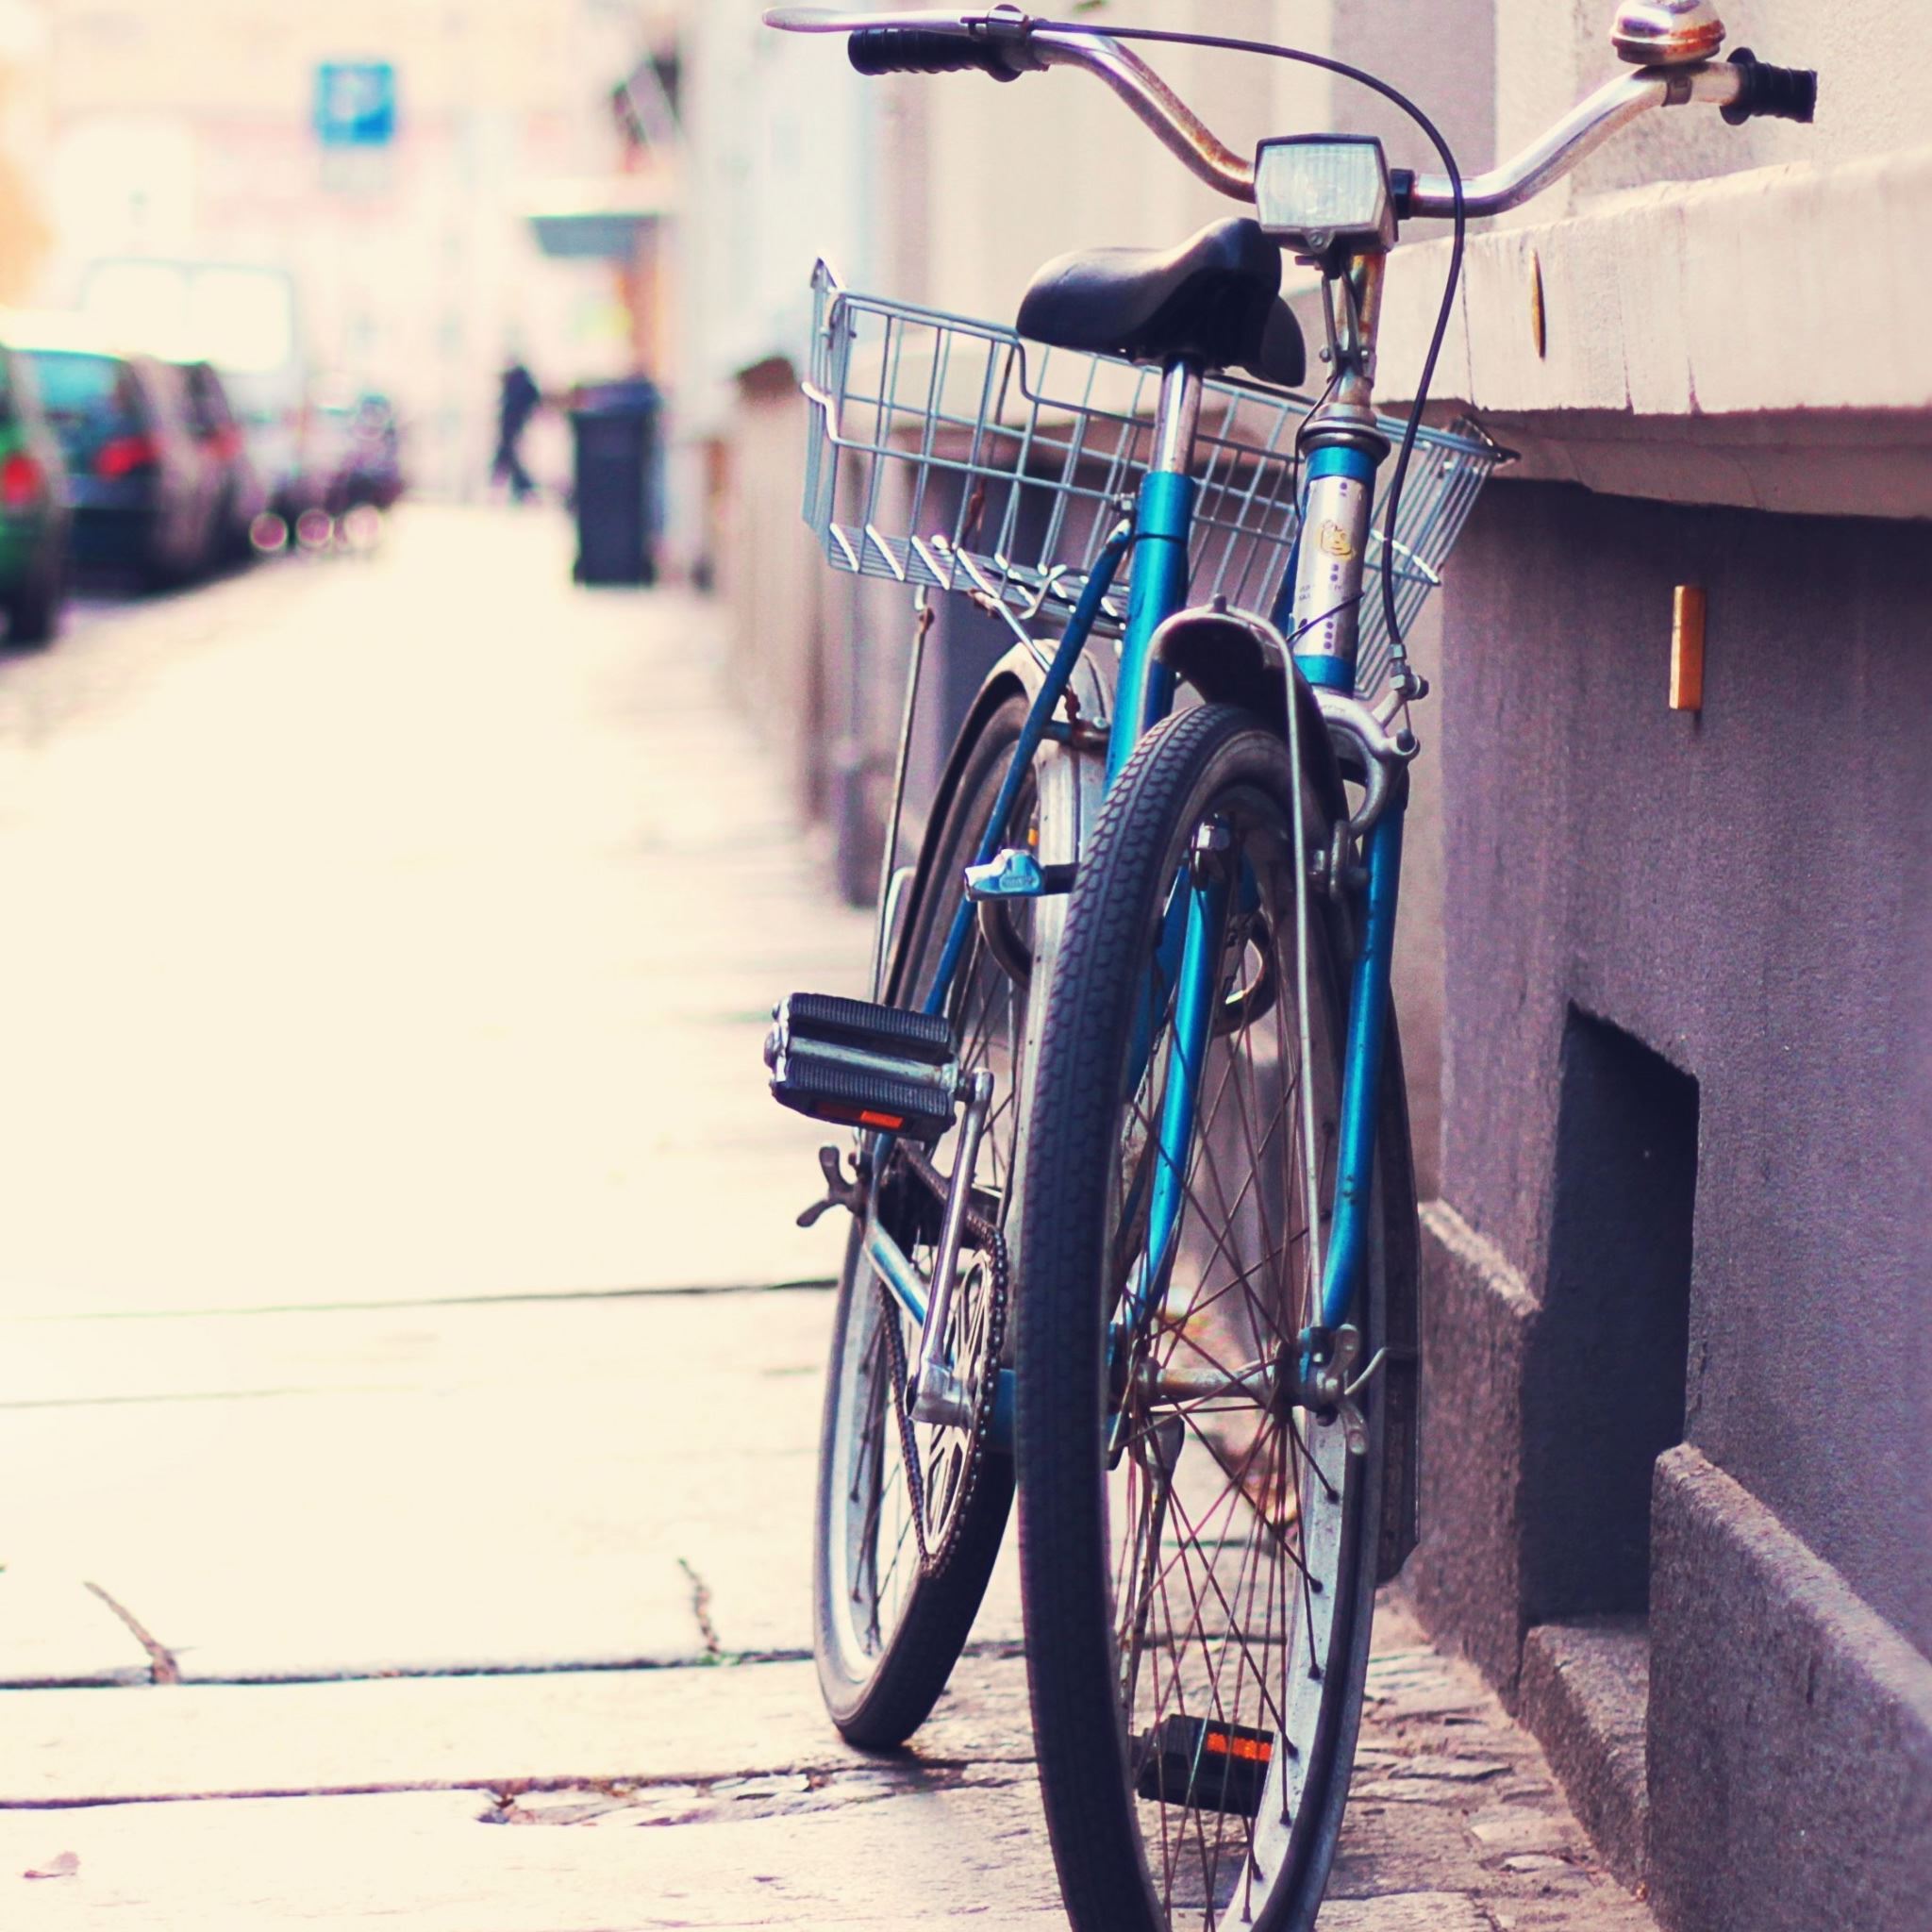 Lonely Bicycle iPad Air wallpaper 